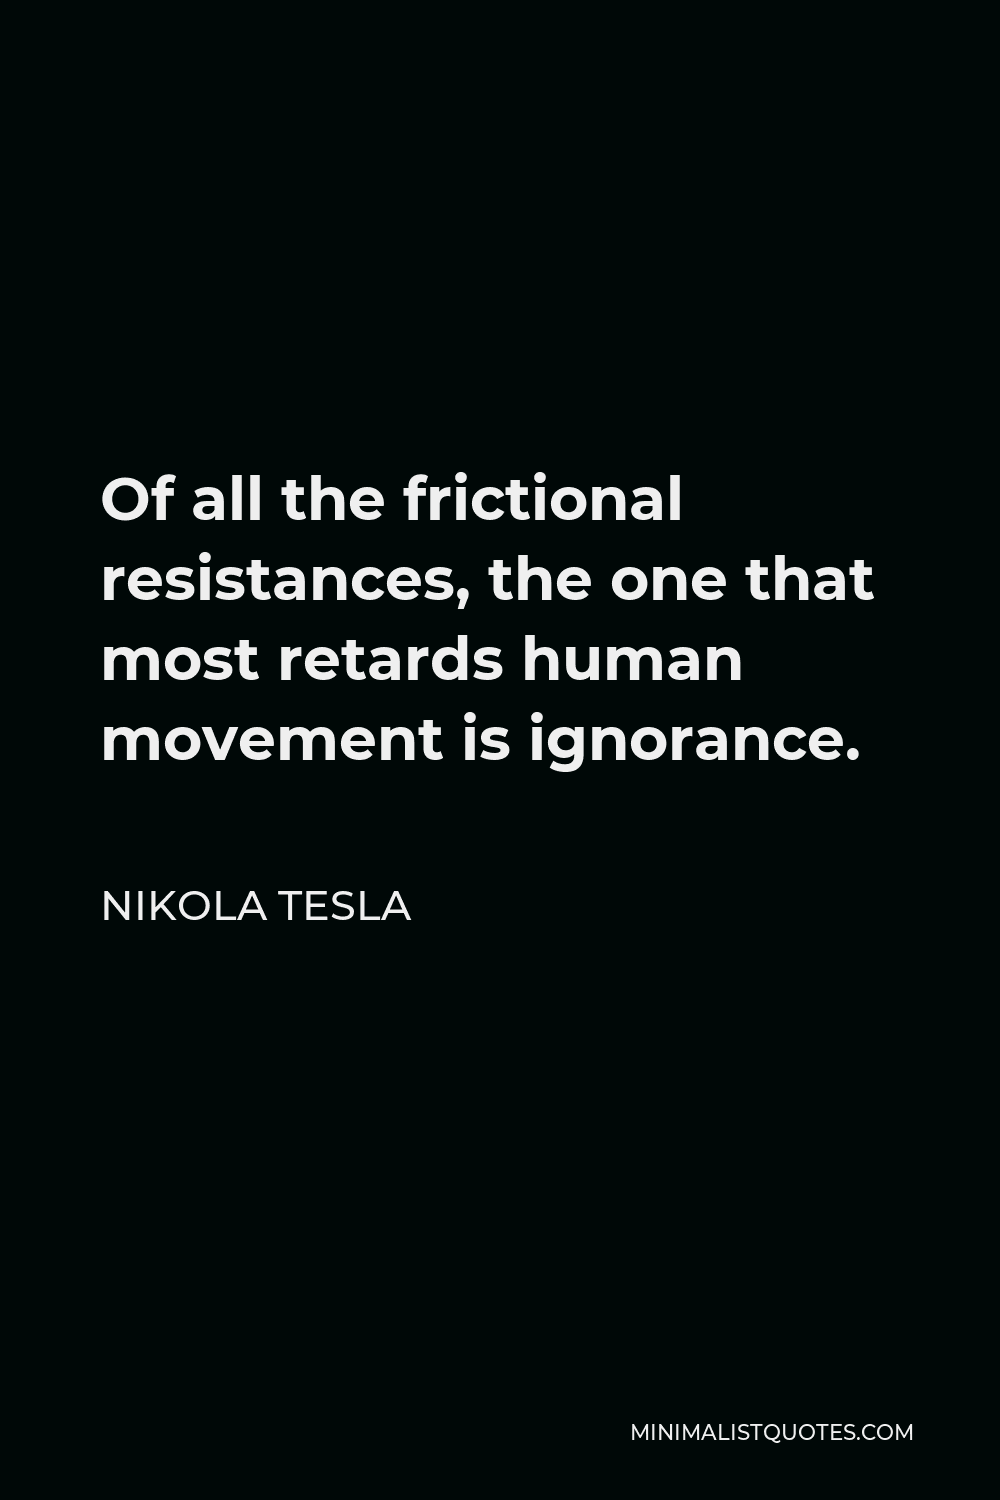 Nikola Tesla Quote - Of all the frictional resistances, the one that most retards human movement is ignorance.